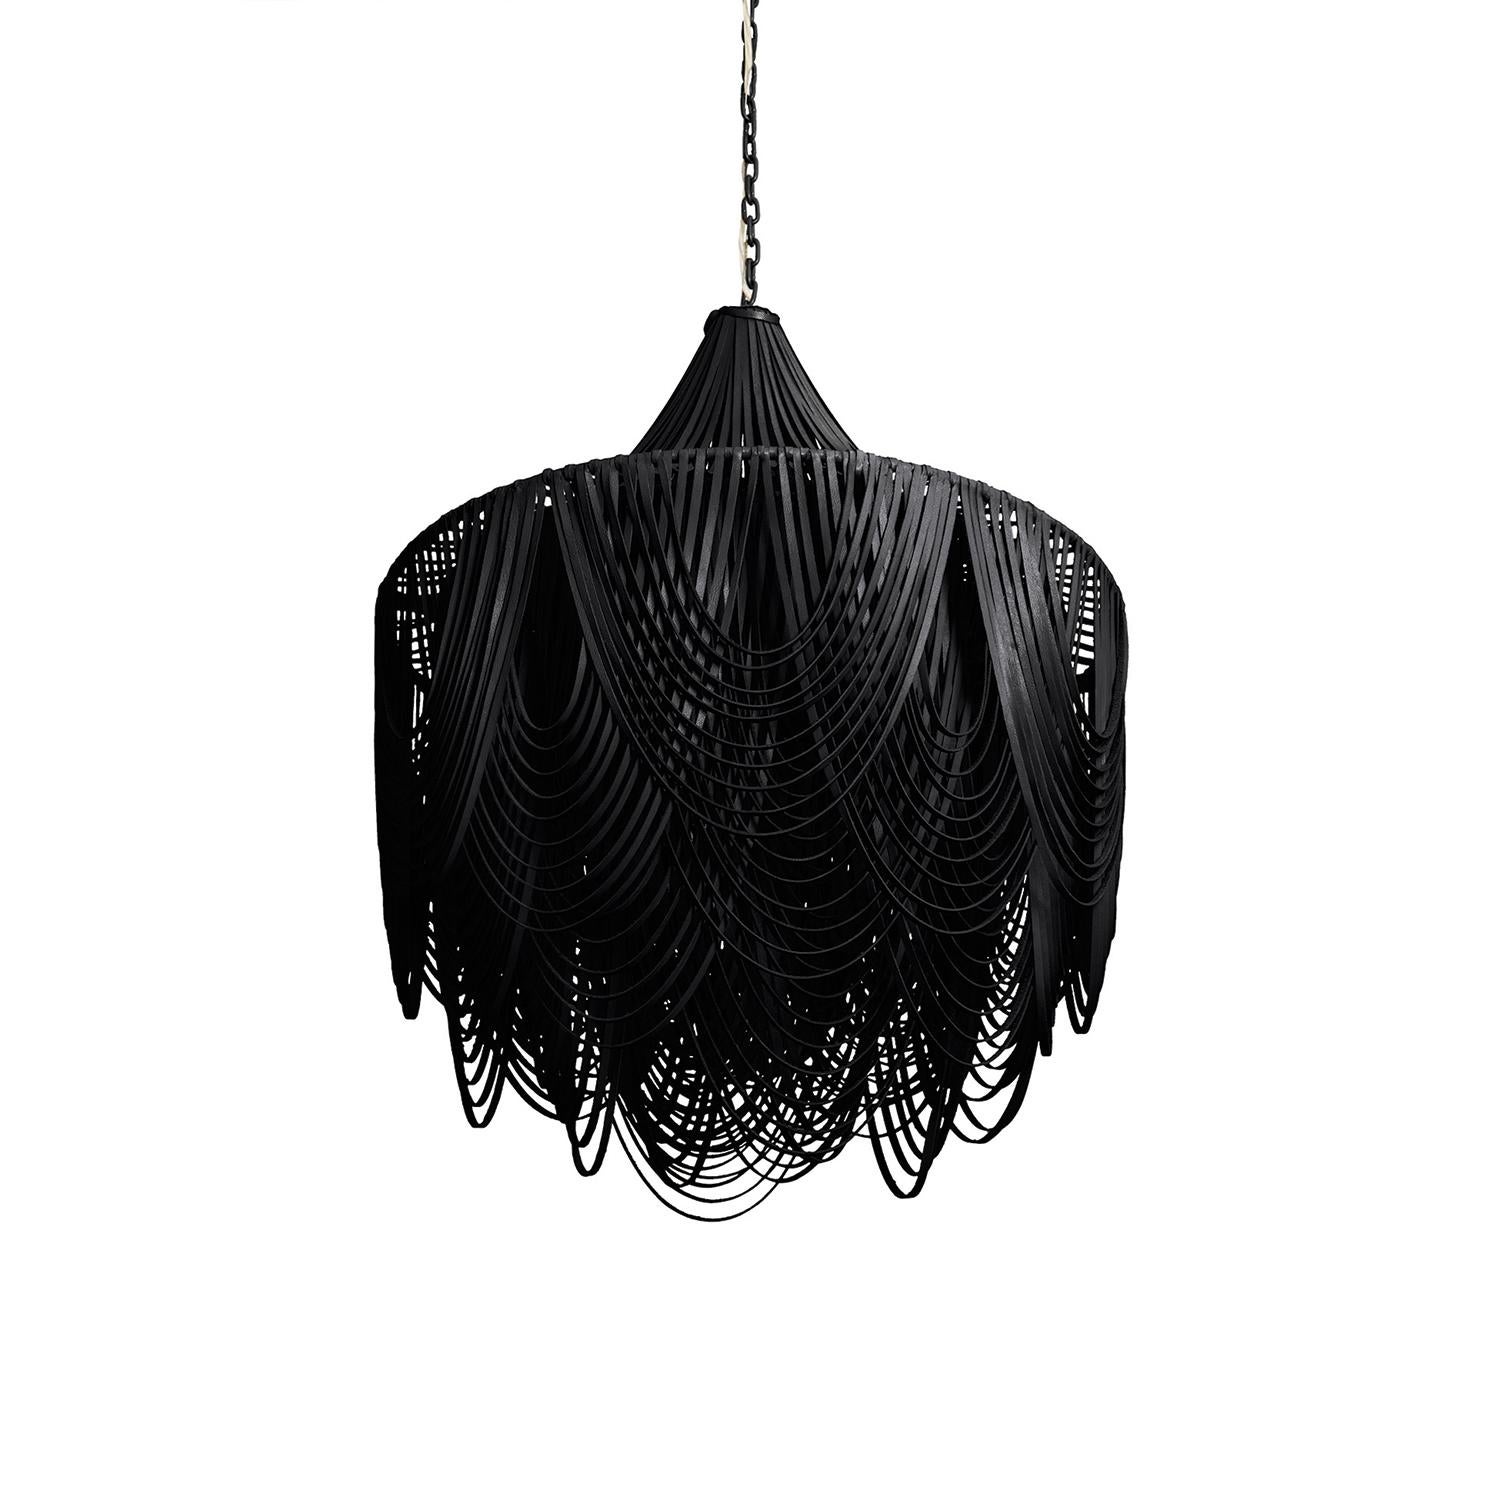 Perhaps the most unexpected textile for a light fixture, the leather Whisper Chandelier is handcrafted with swags of leather layered in graceful arcs for a stunning-yet- natural look. The ambient light from within the fixture provides a soft